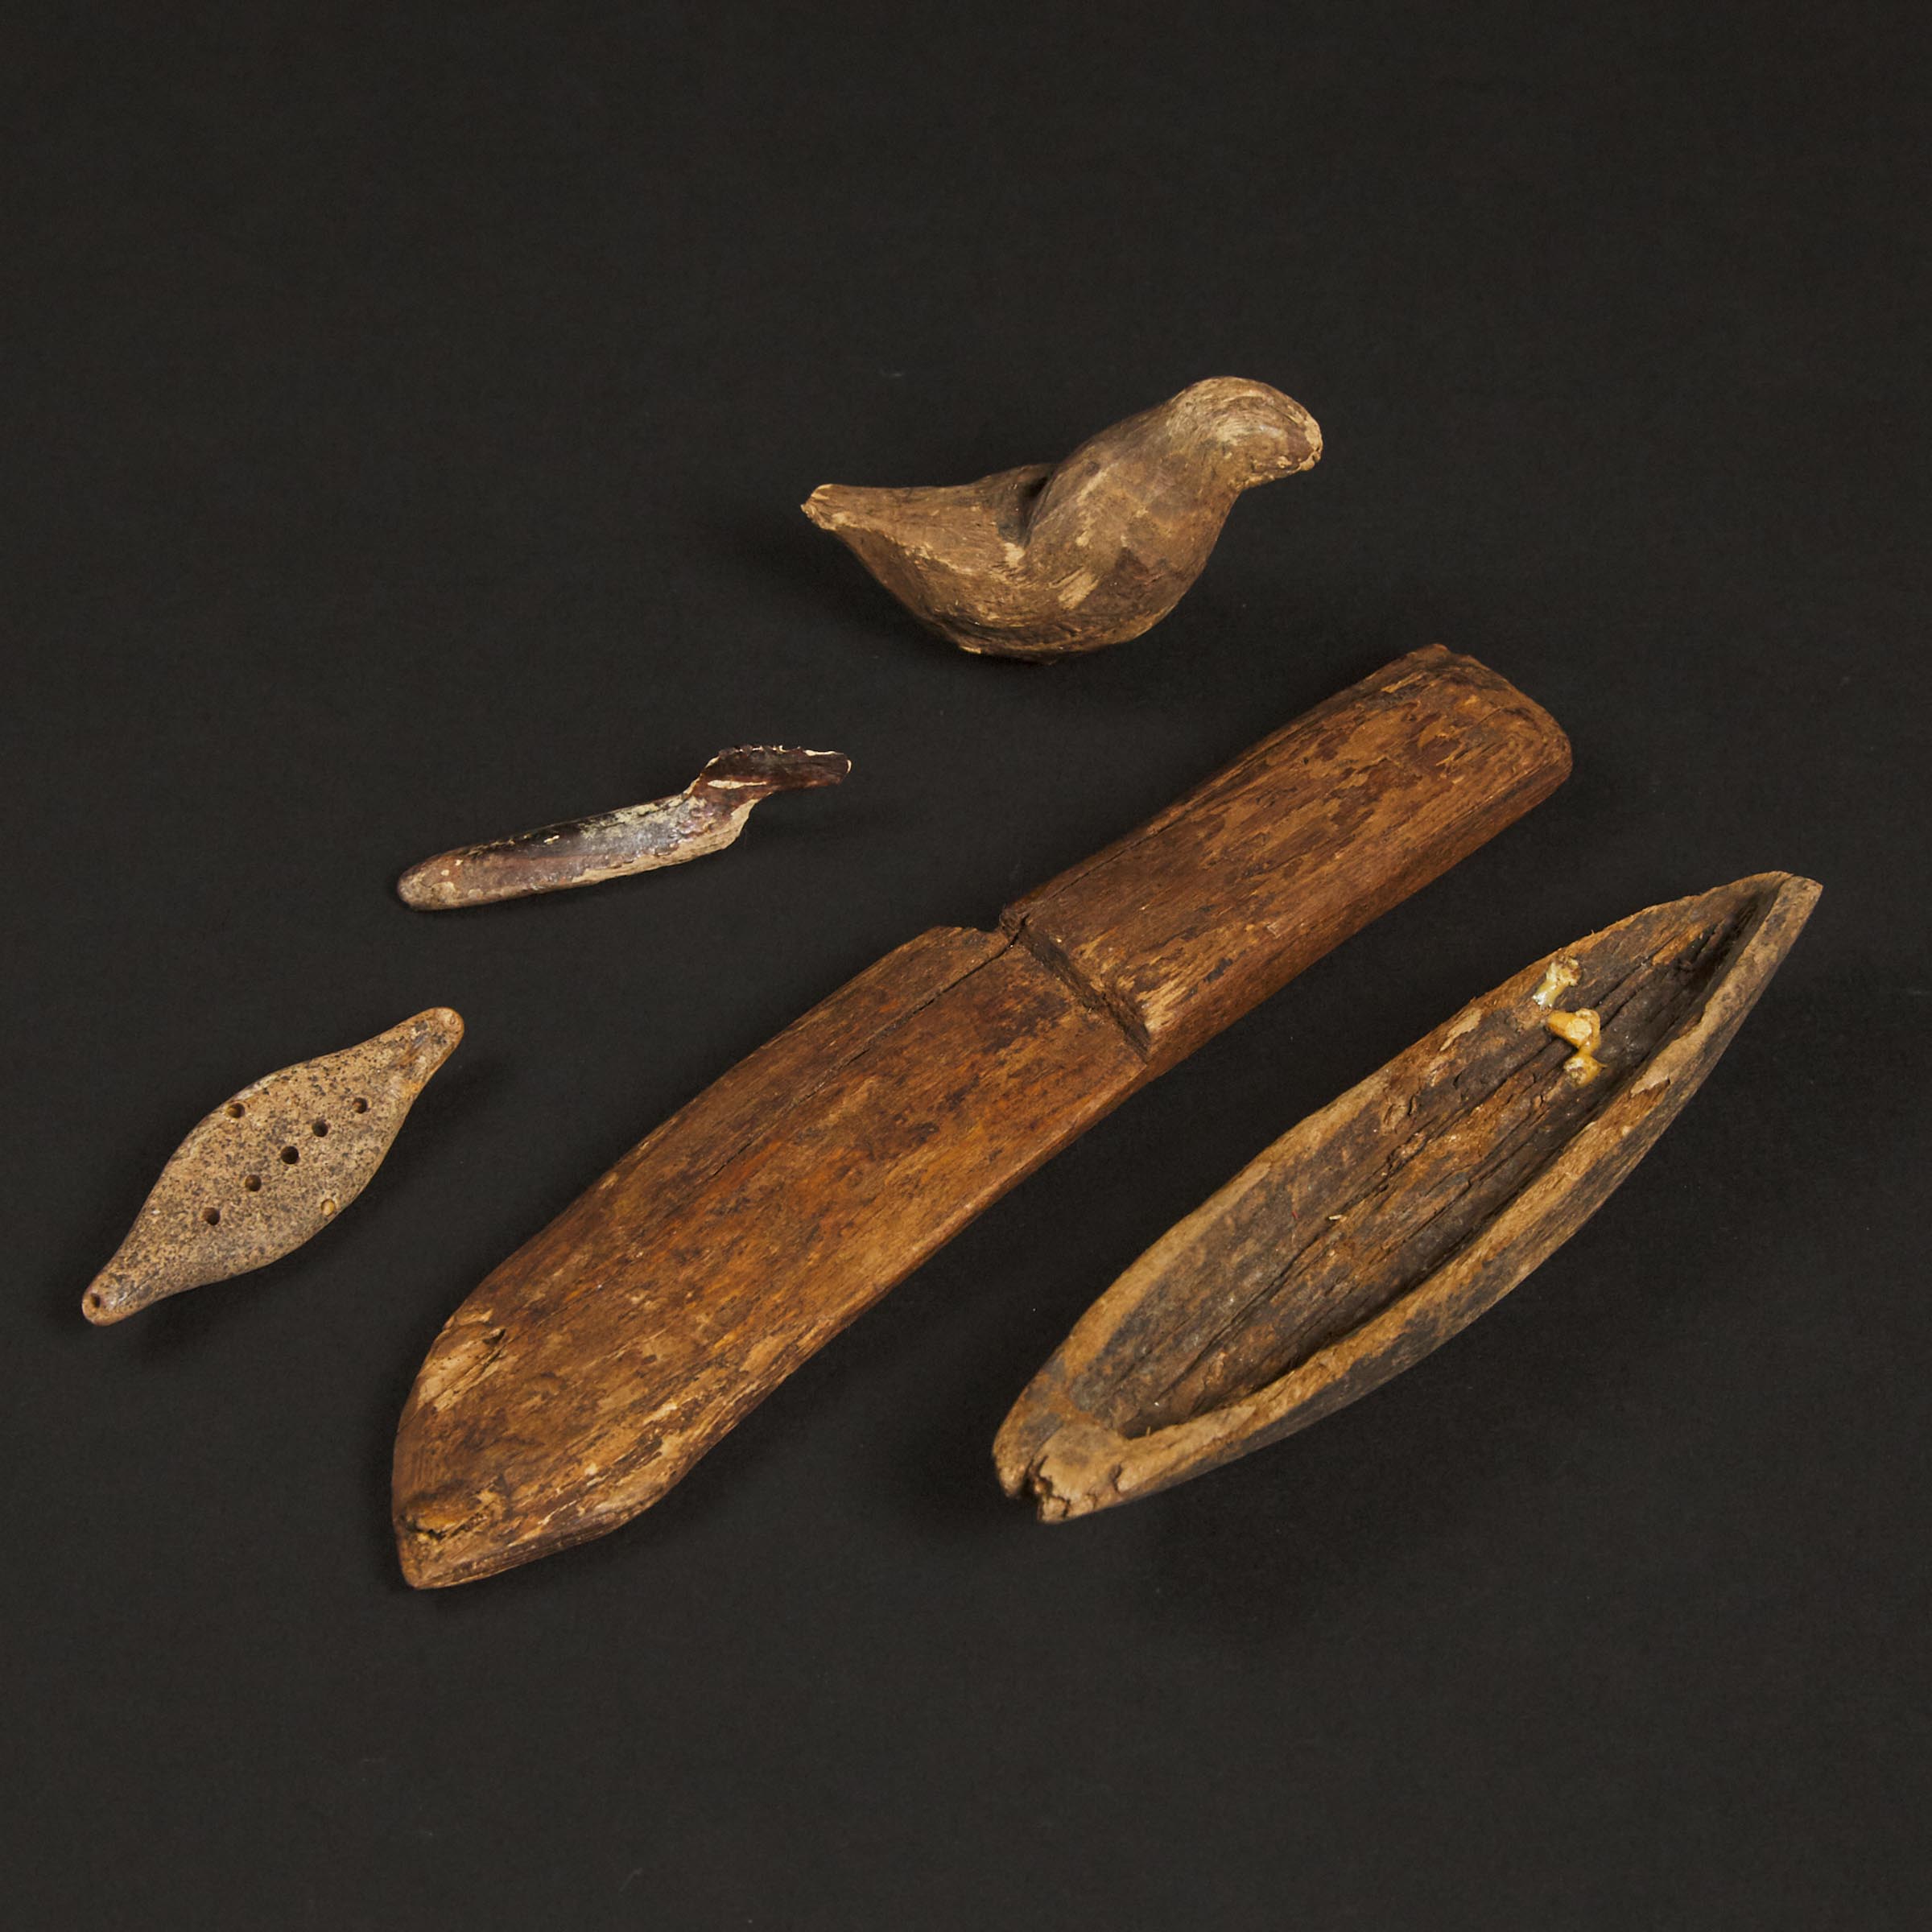 Bird Effigy and Other Charms, Inupiat, Sitaisaq (Brevig Mission), Pre-1900